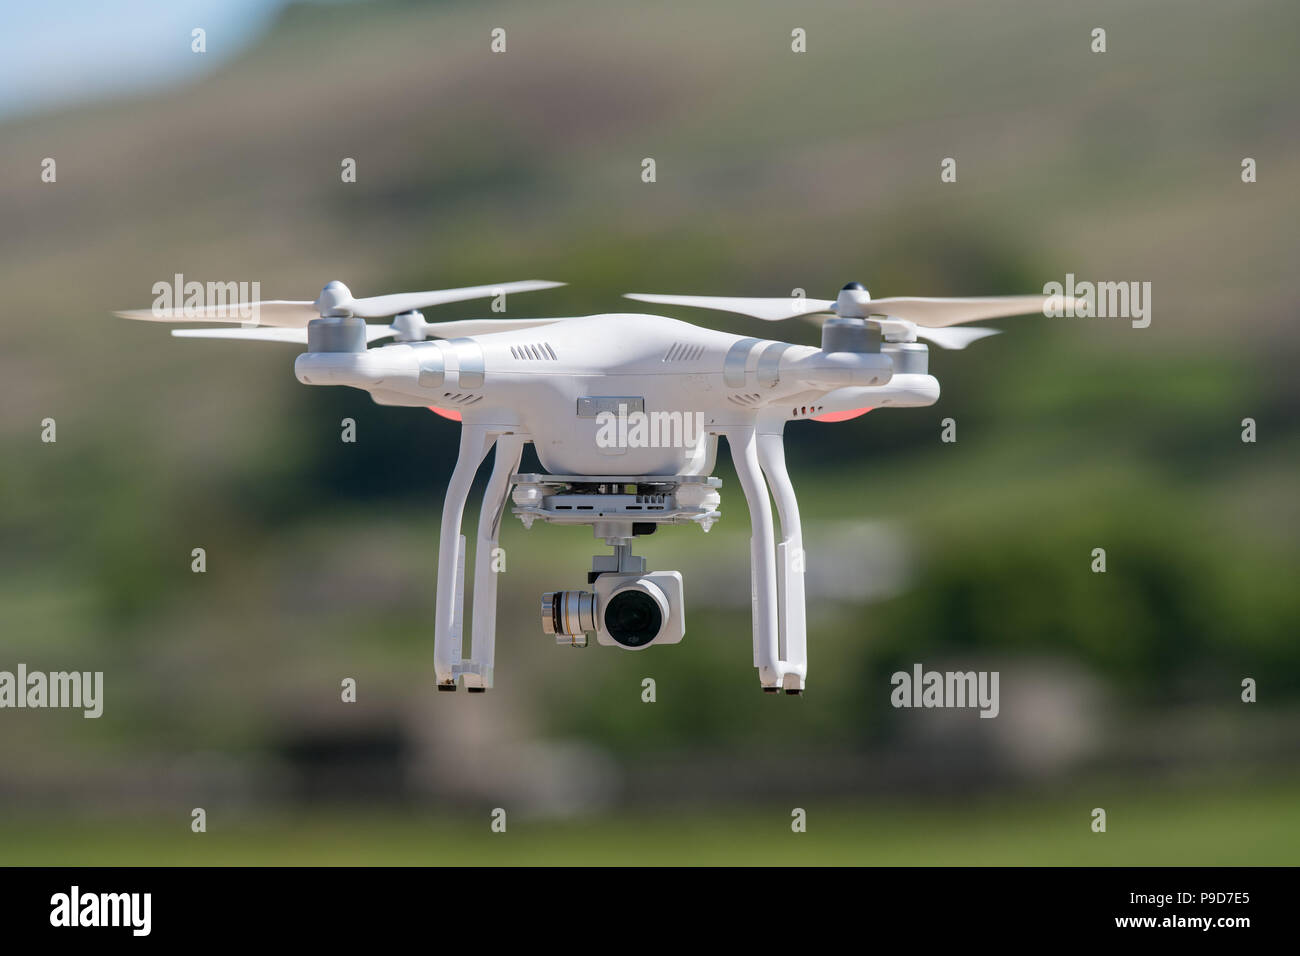 Drone with camera being used in the countryside. Stock Photo